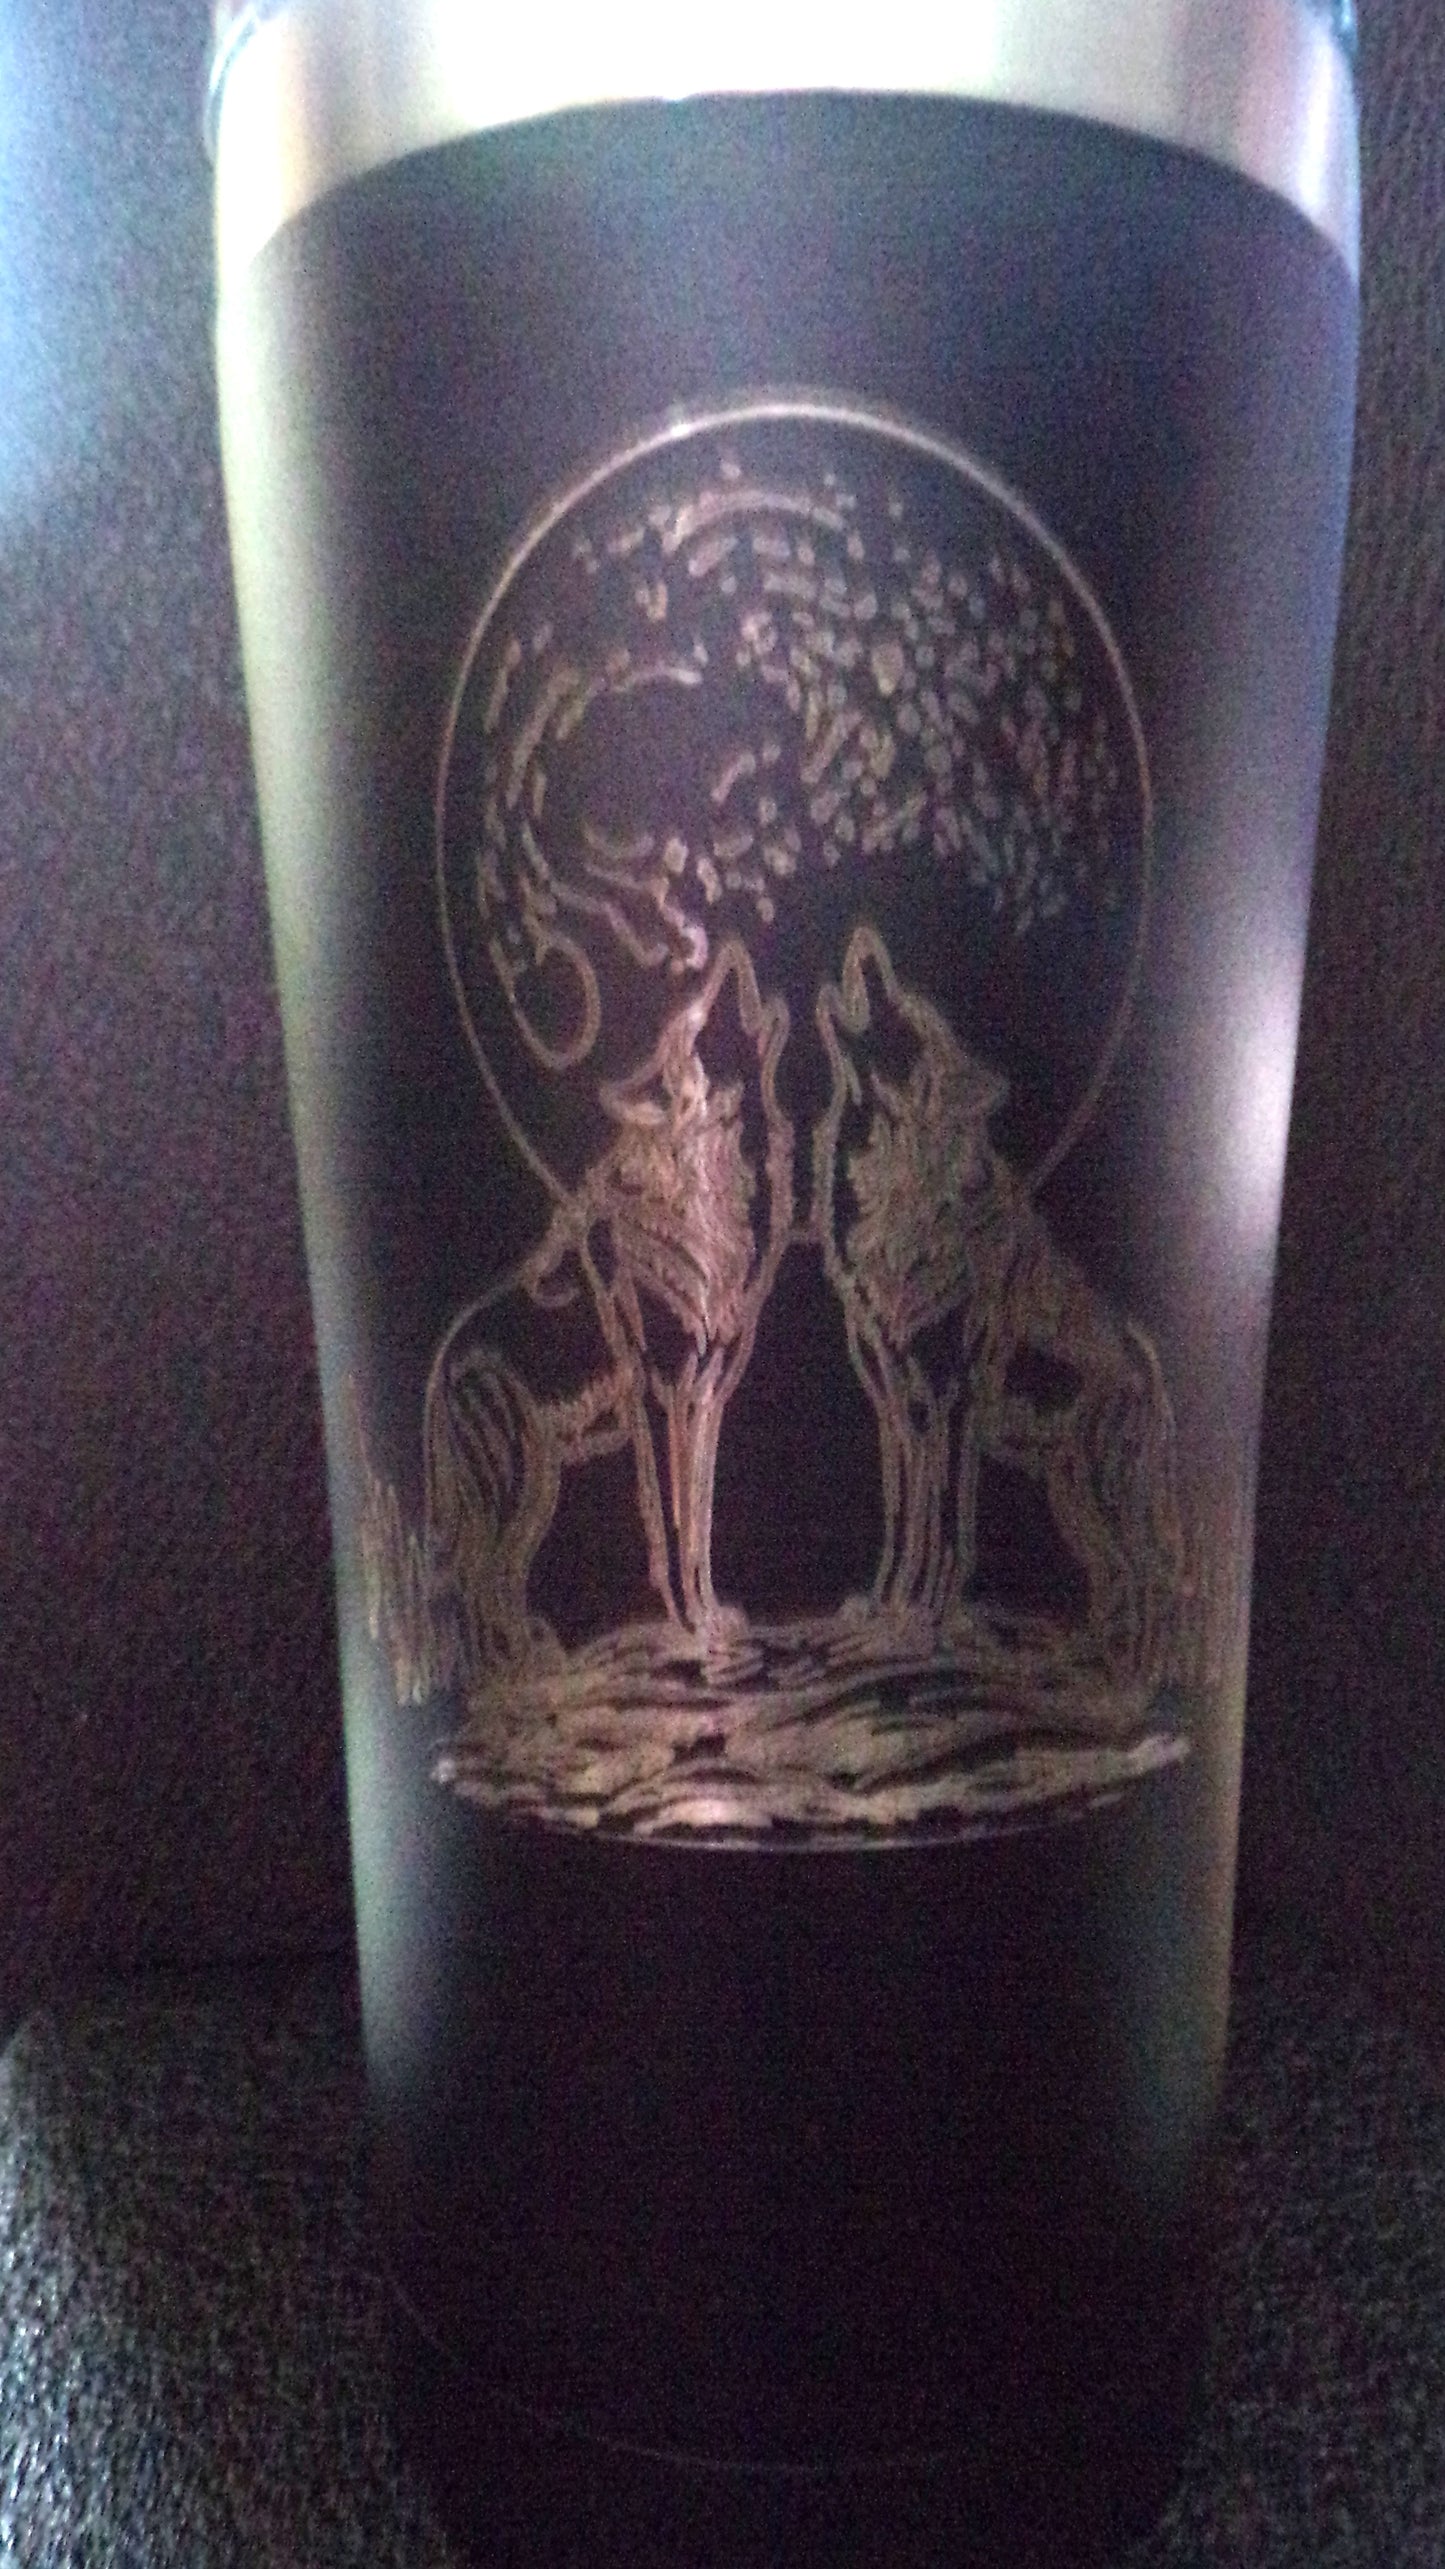 22oz Tumbler / Coffee Mug with lid Engraved with Wolves